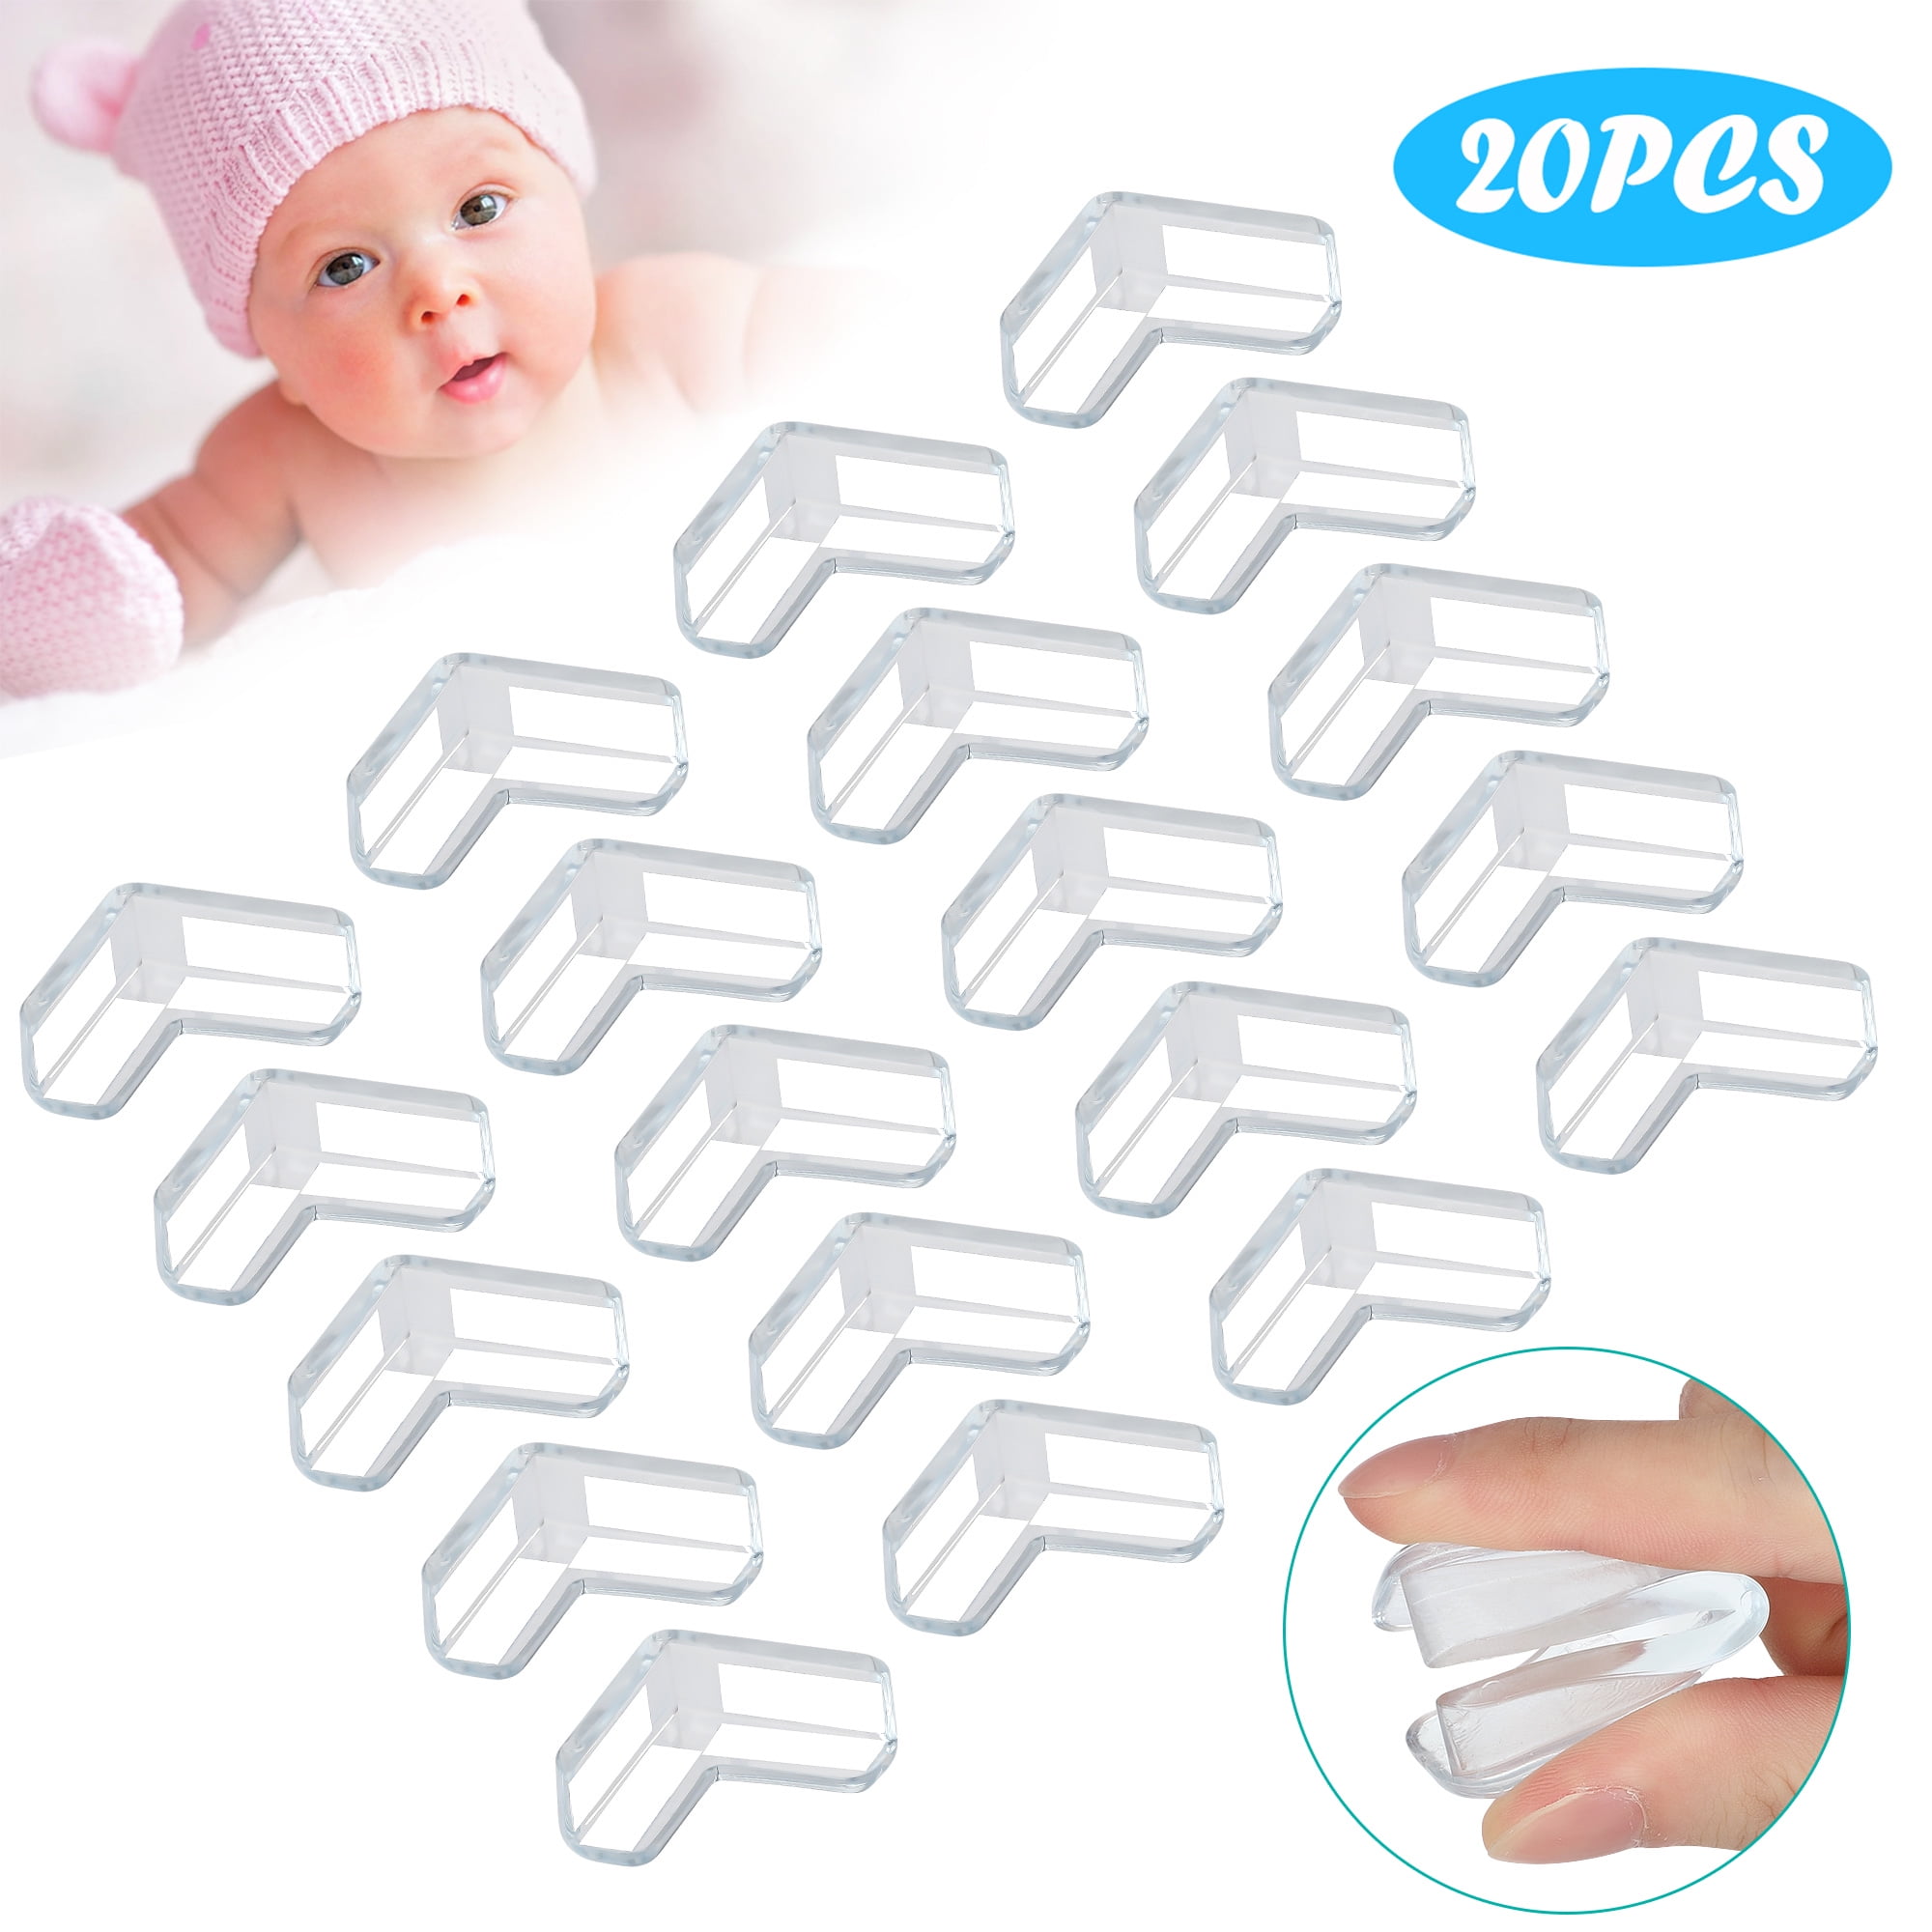 Edge Lining Safety Guards for Child Safety - Baby-Proof Head Bumpers